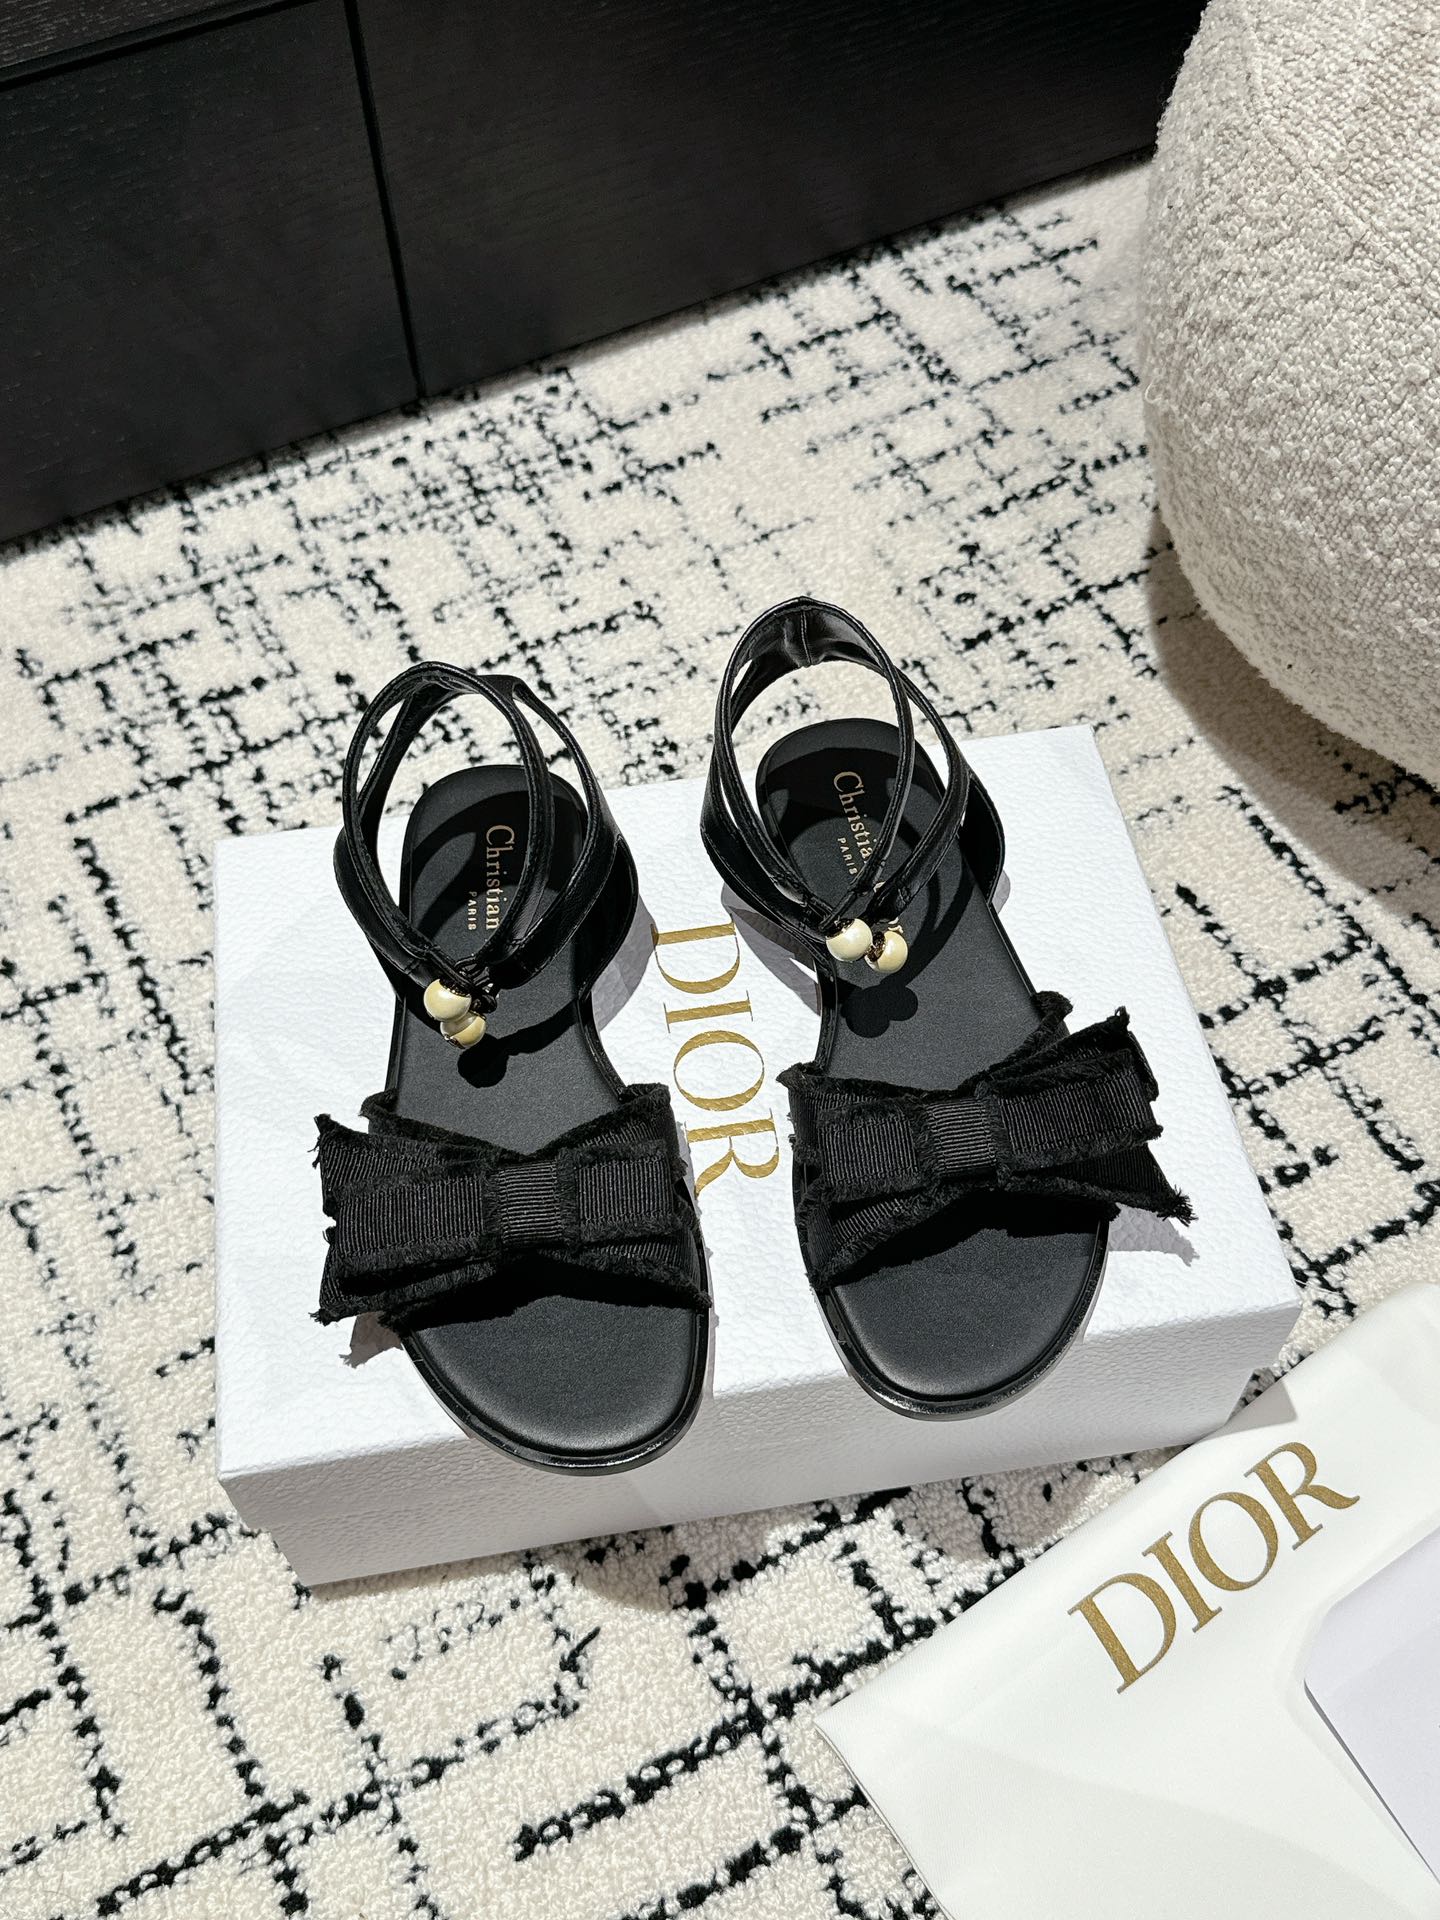 Dior Shoes Sandals Sell High Quality
 Black White Cowhide Genuine Leather Resin Sheepskin Spring/Summer Collection Fashion